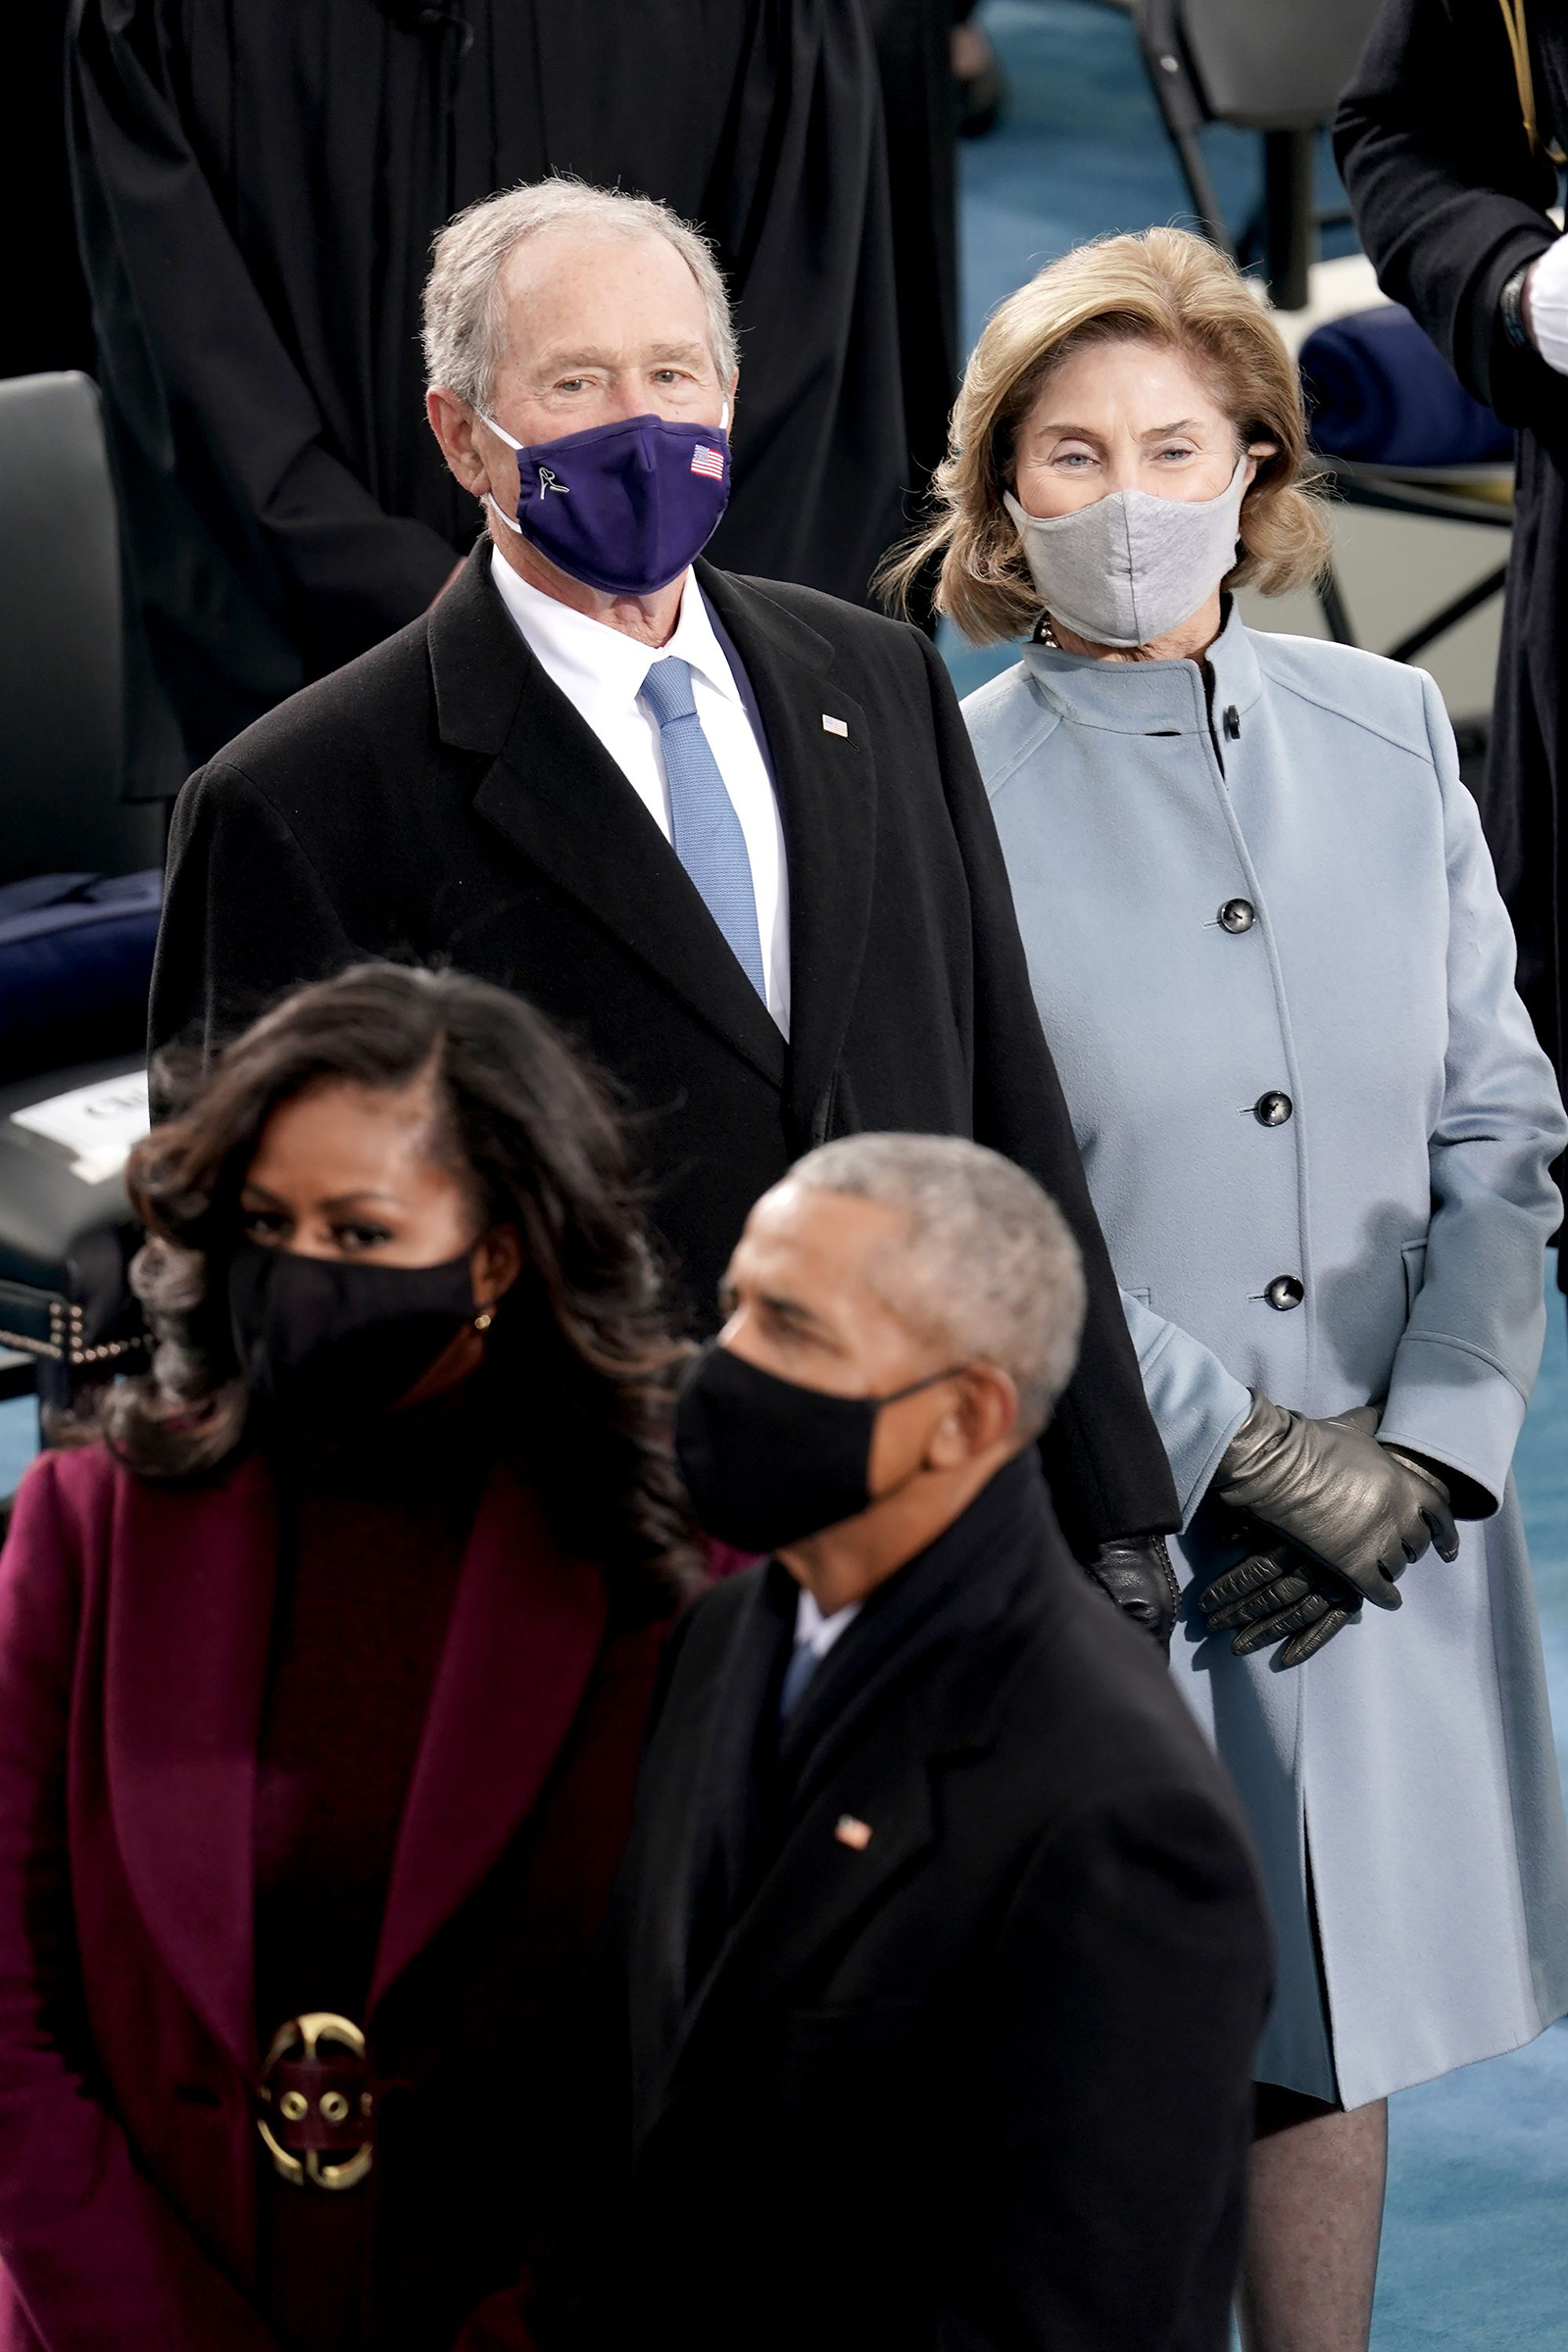 Former President George W. Bush, Laura Bush, former President Barack Obama and Michelle Obama are seen prior to the 59th Presidential Inauguration. (Shutterstock)